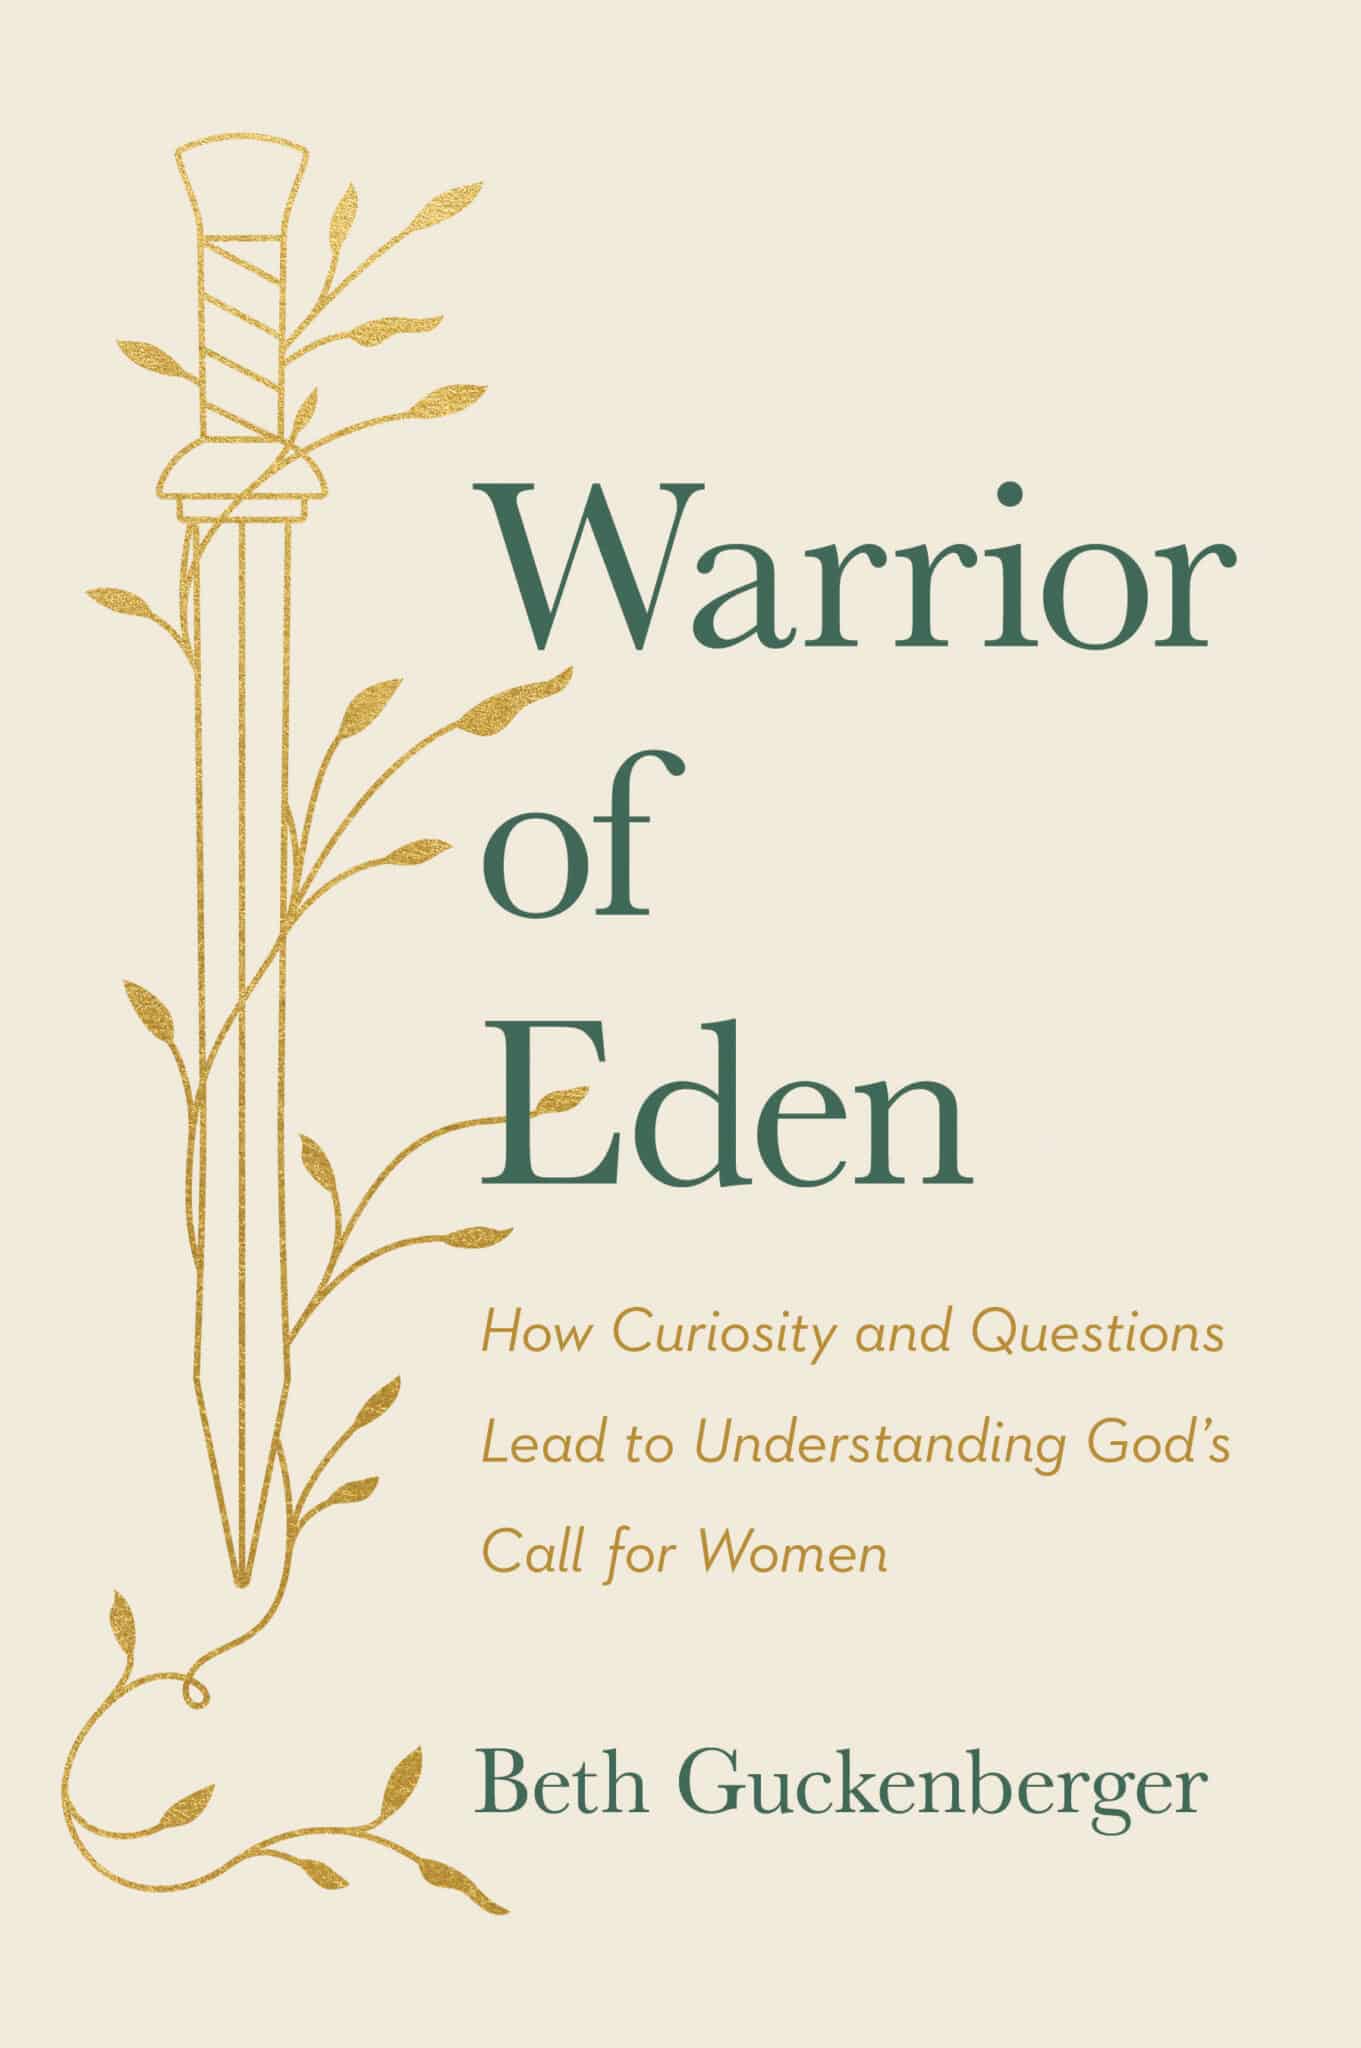 The warrior of eden book cover image